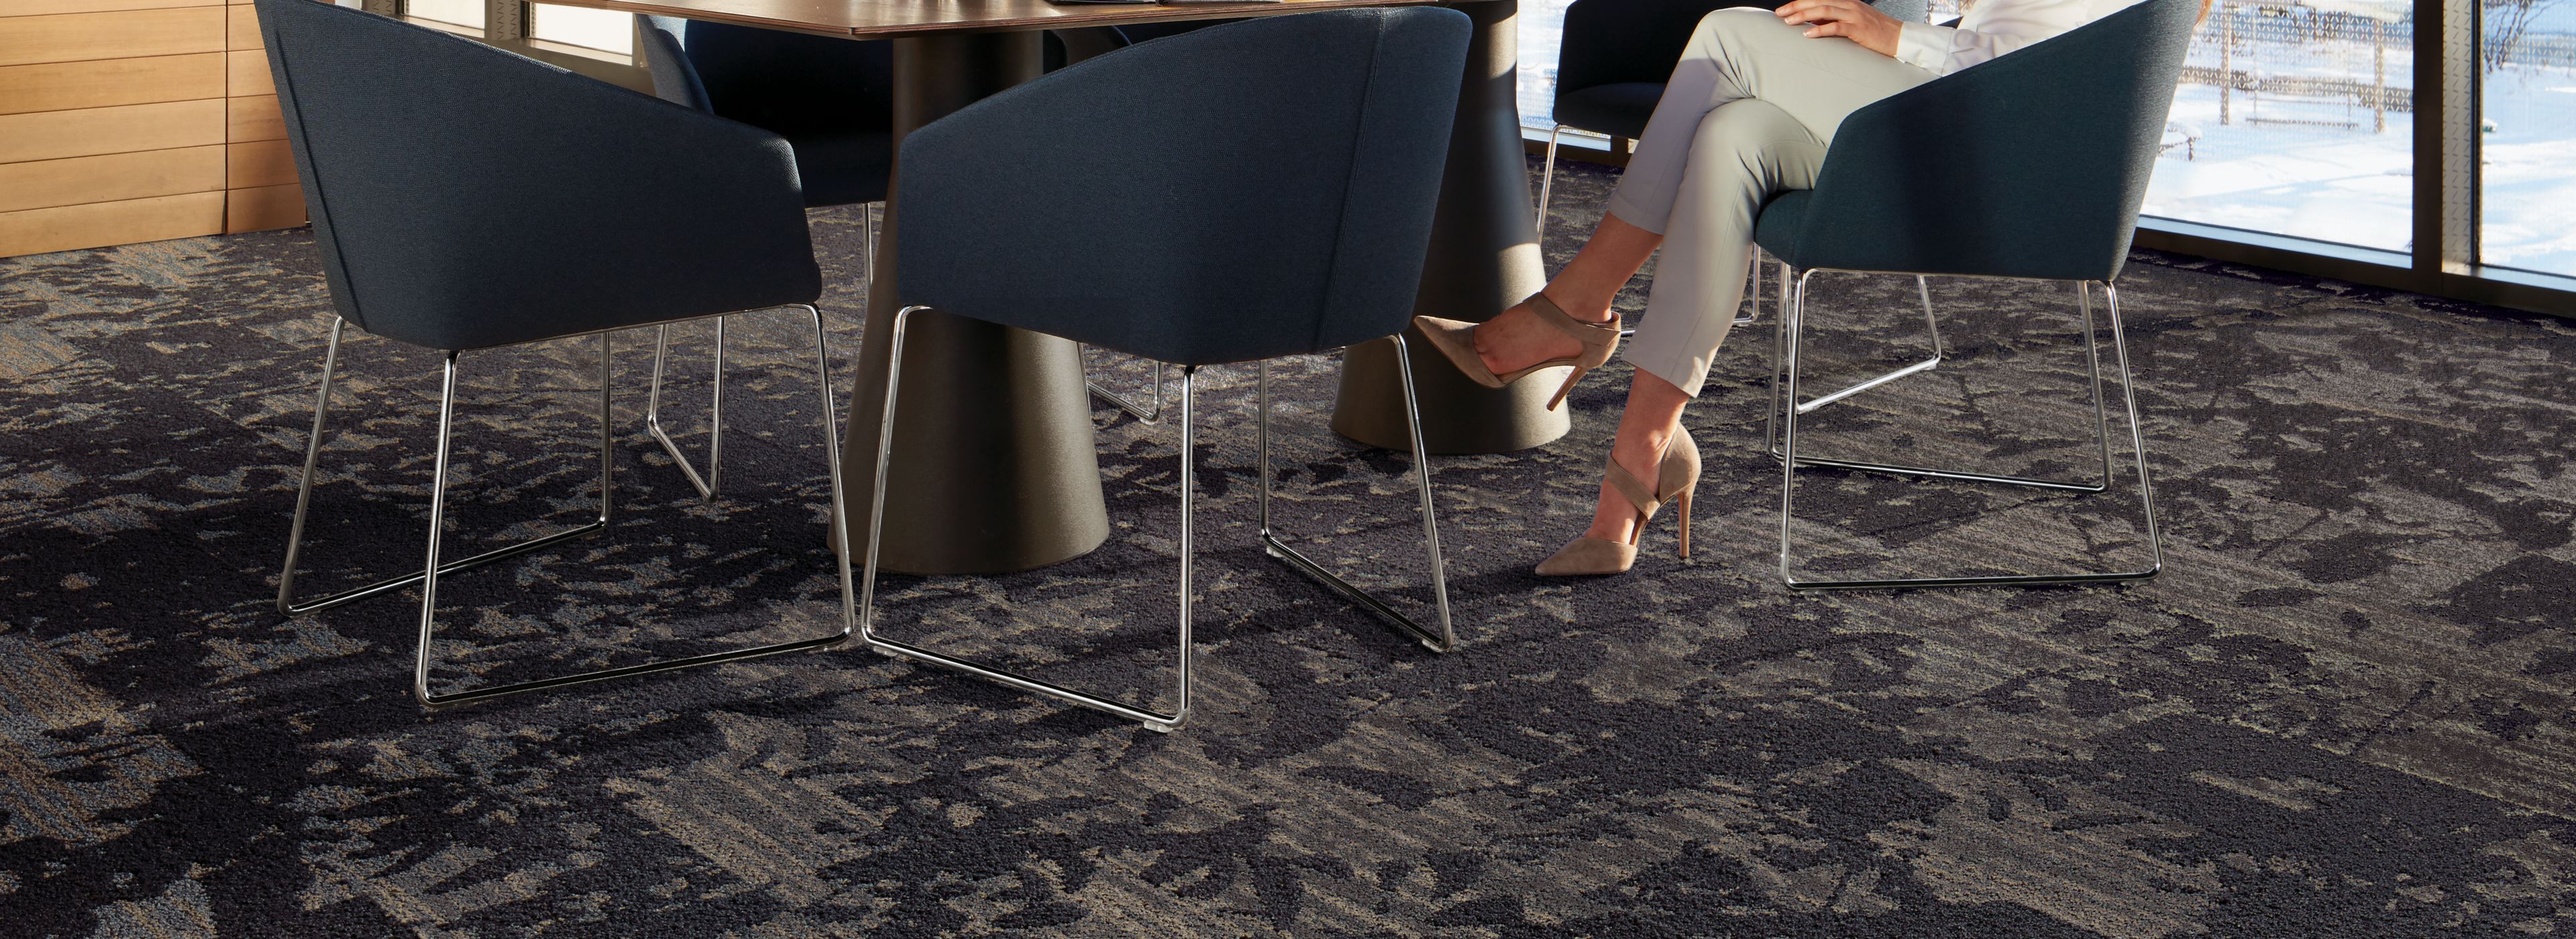 Interface Shading plank carpet tile in seating area with table and chairs numéro d’image 1